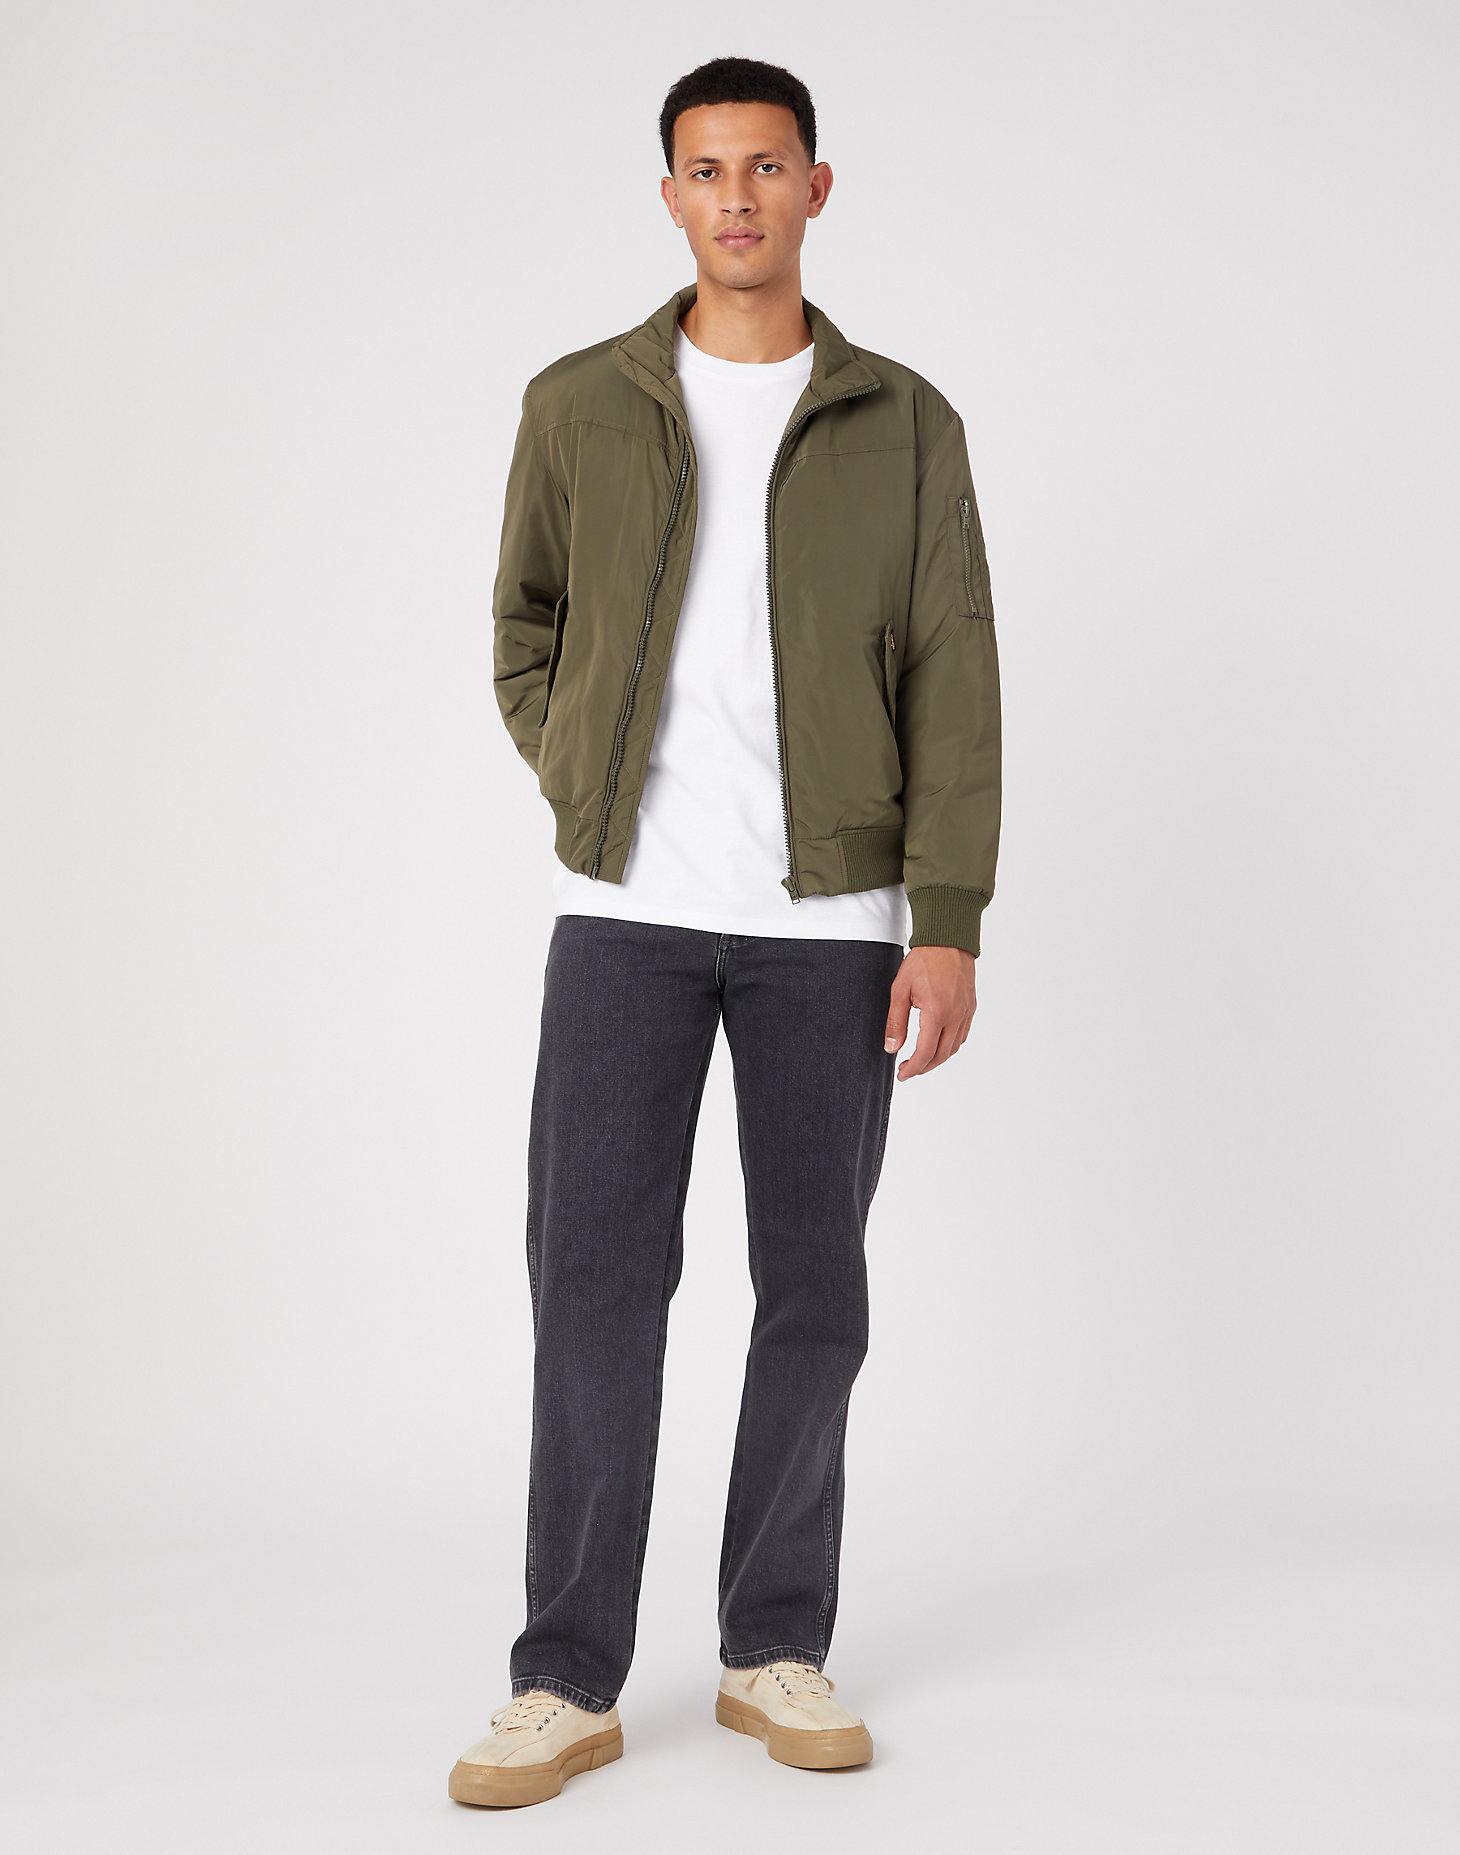 Bomber Jacket in Militare Green alternative view 1